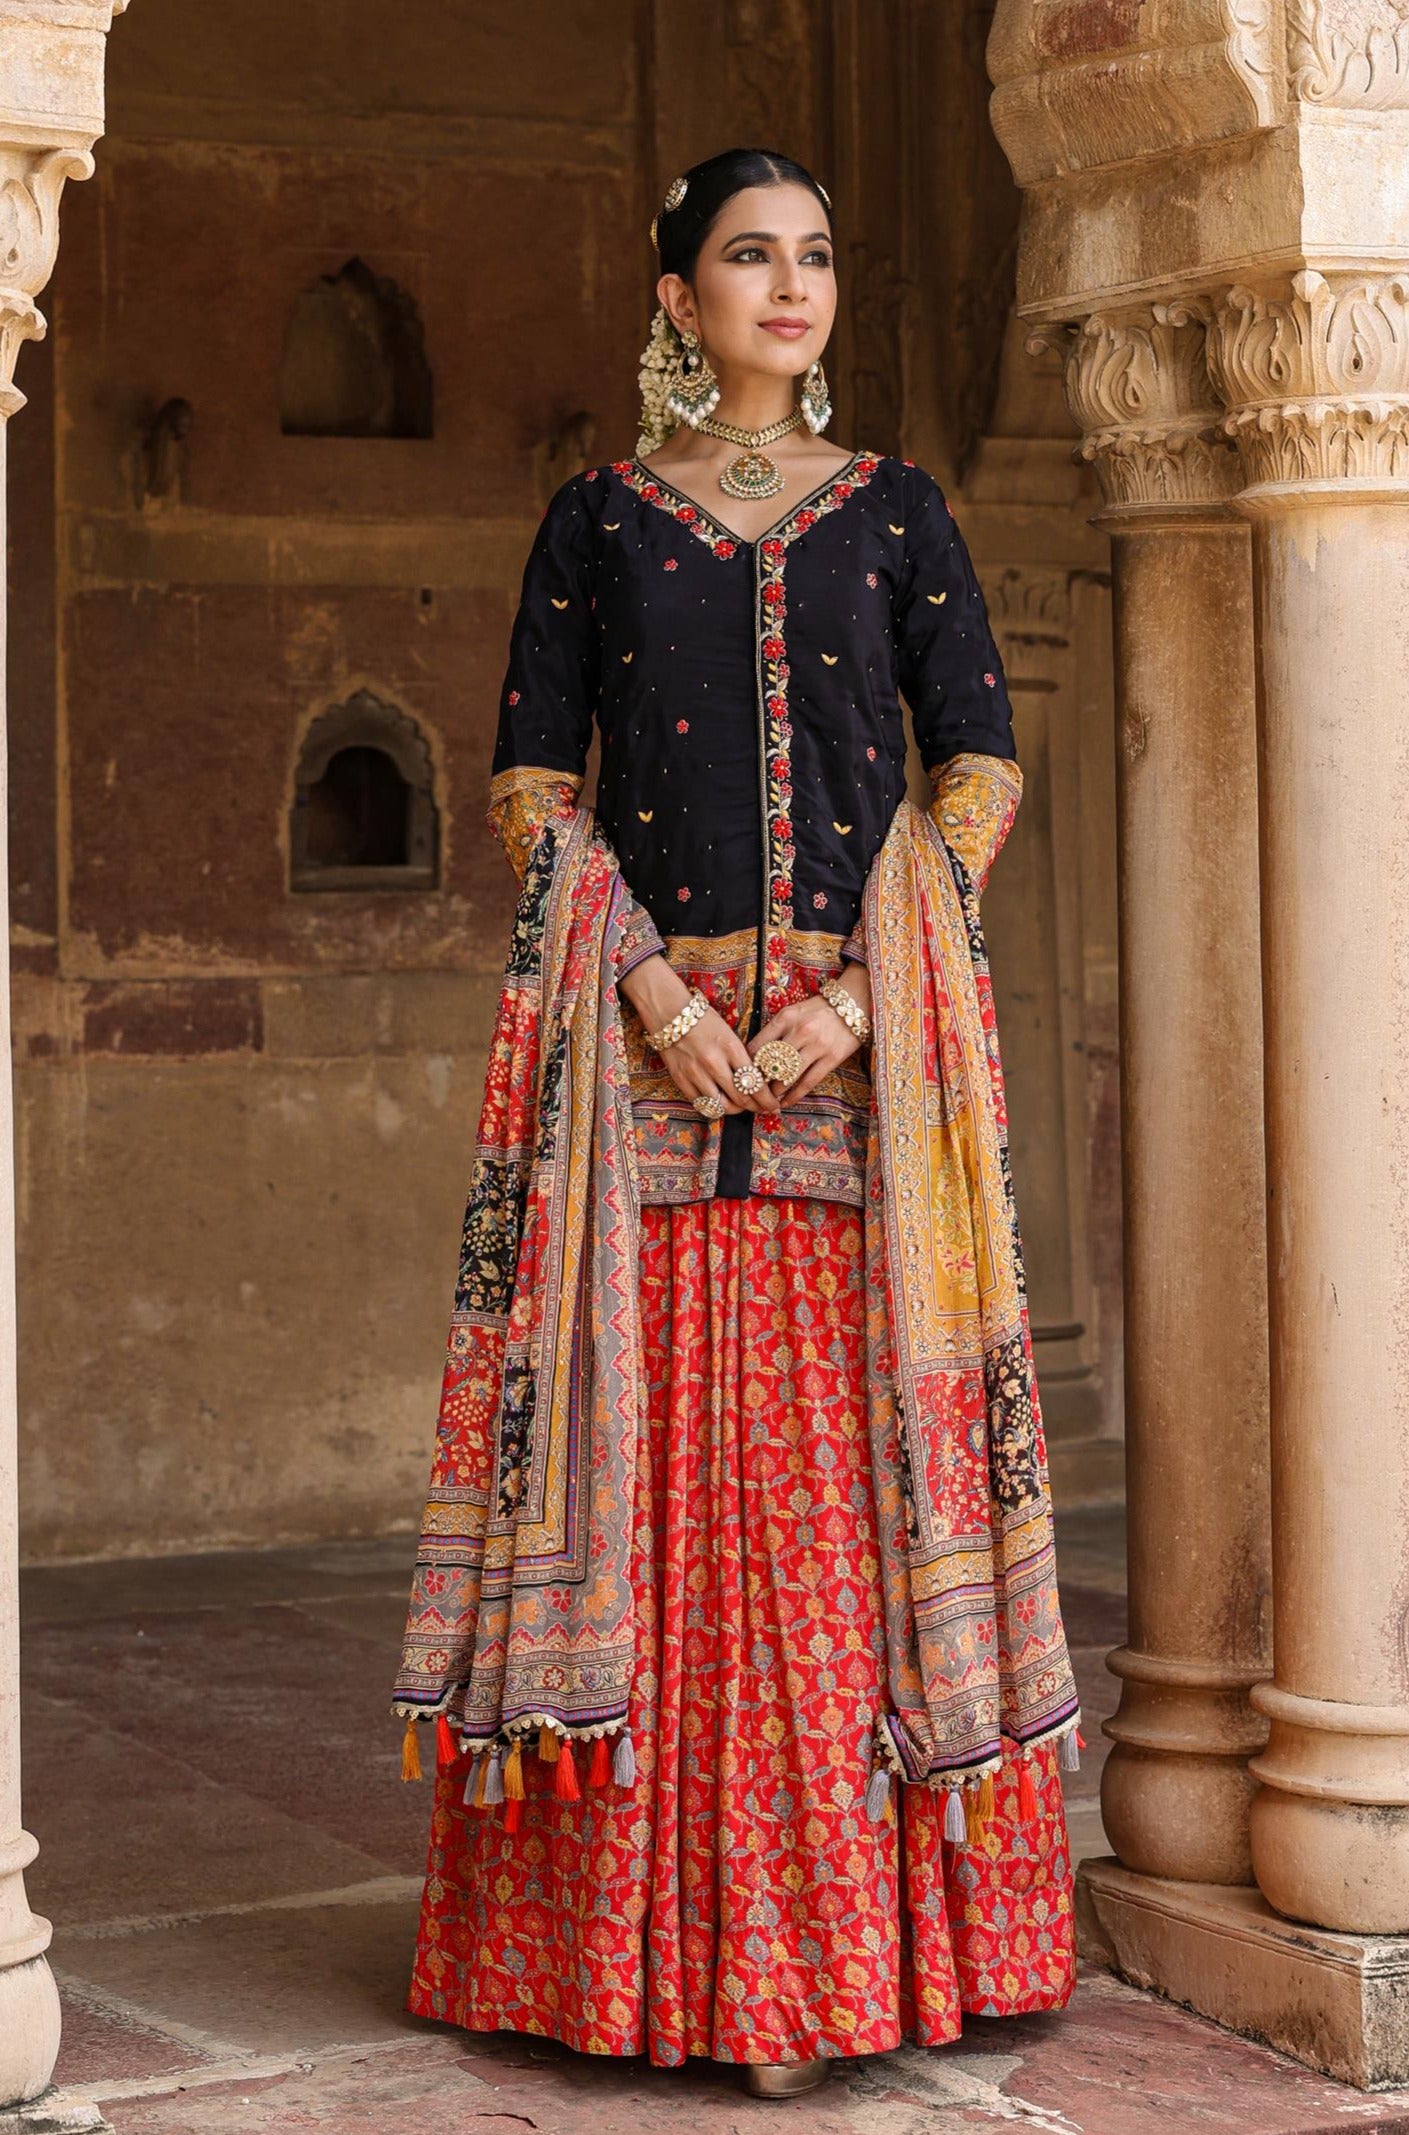 Buy Rajasthan Choli for Women Online from India's Luxury Designers 2023